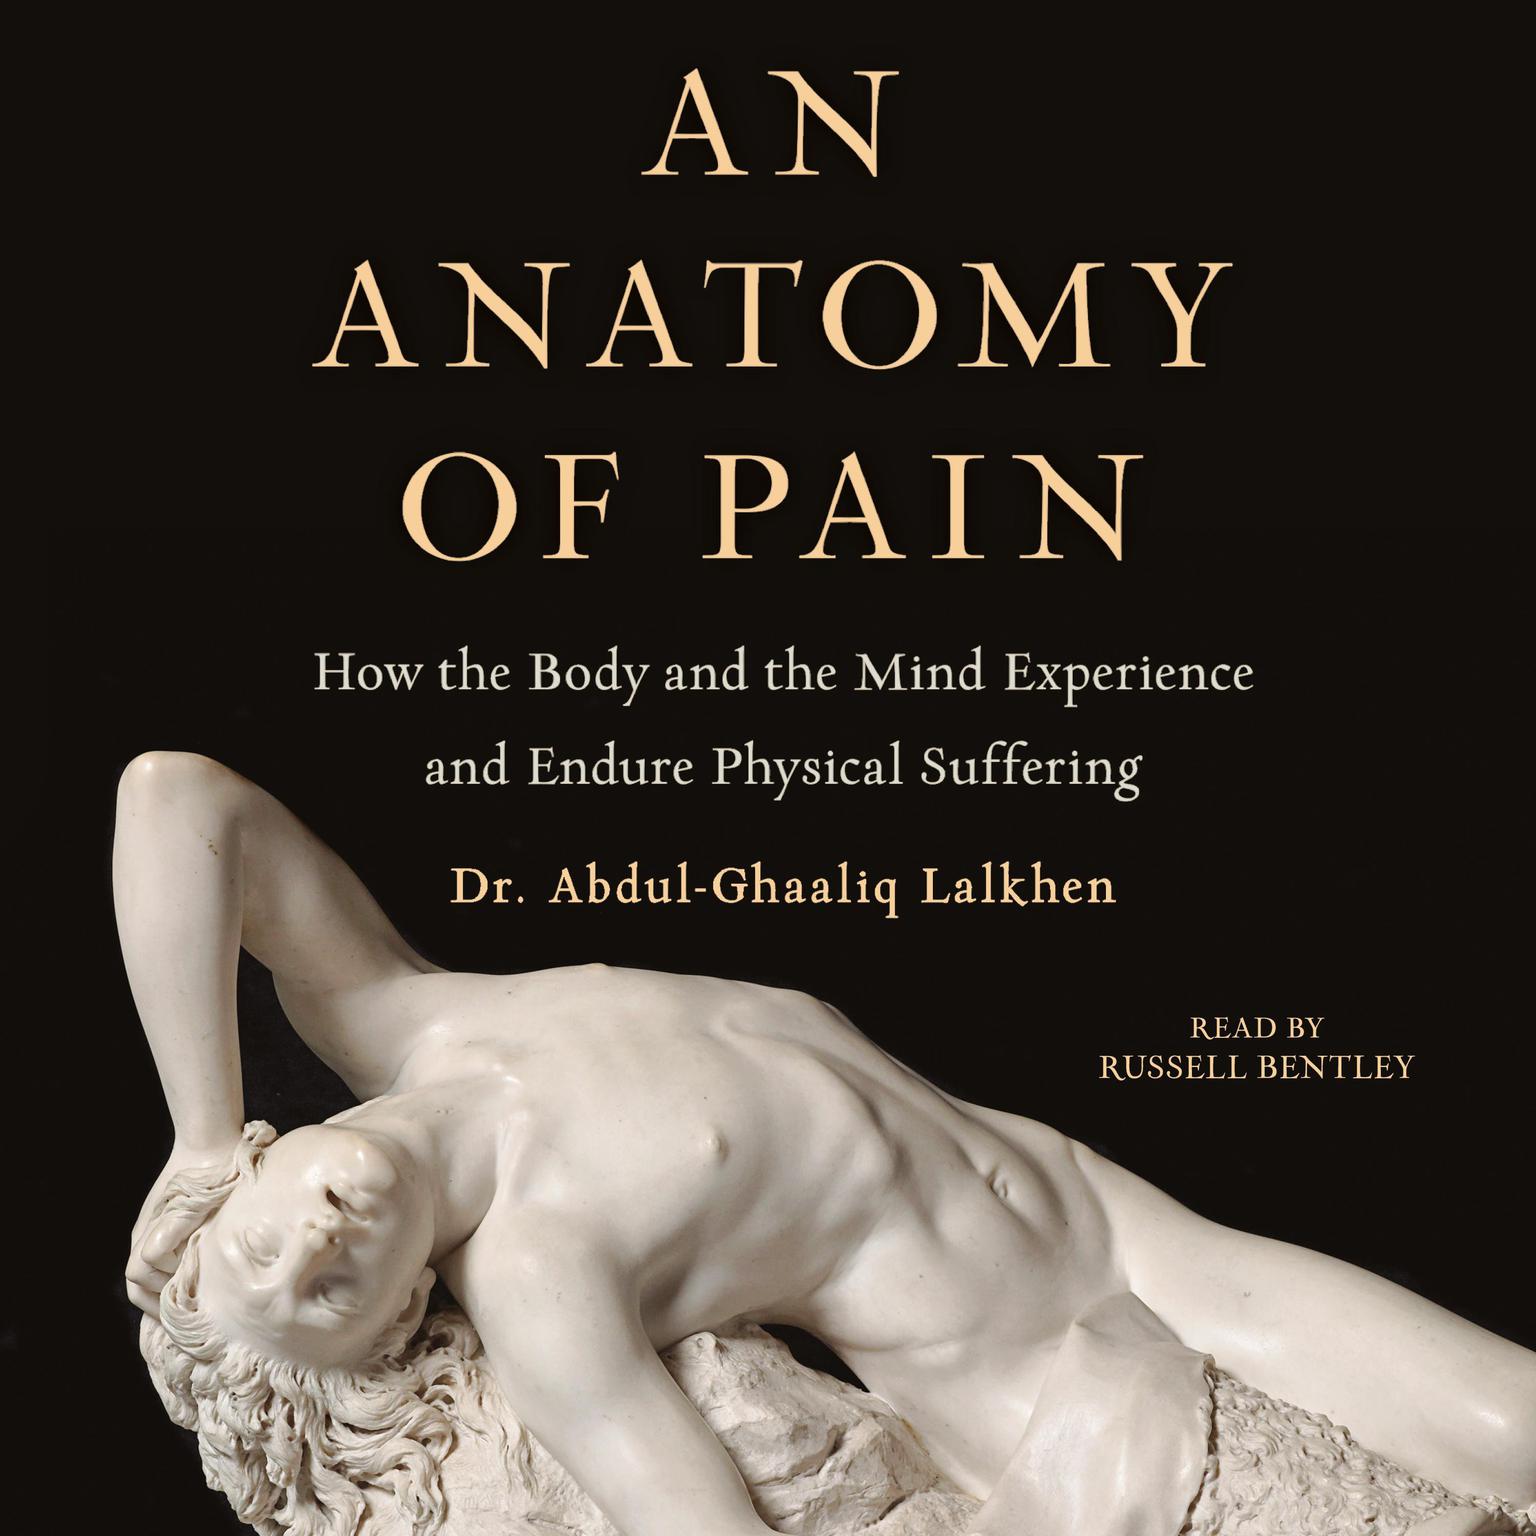 An Anatomy of Pain: How the Body and the Mind Experience and Endure Physical Suffering Audiobook, by Abdul-Ghaaliq Lalkhen